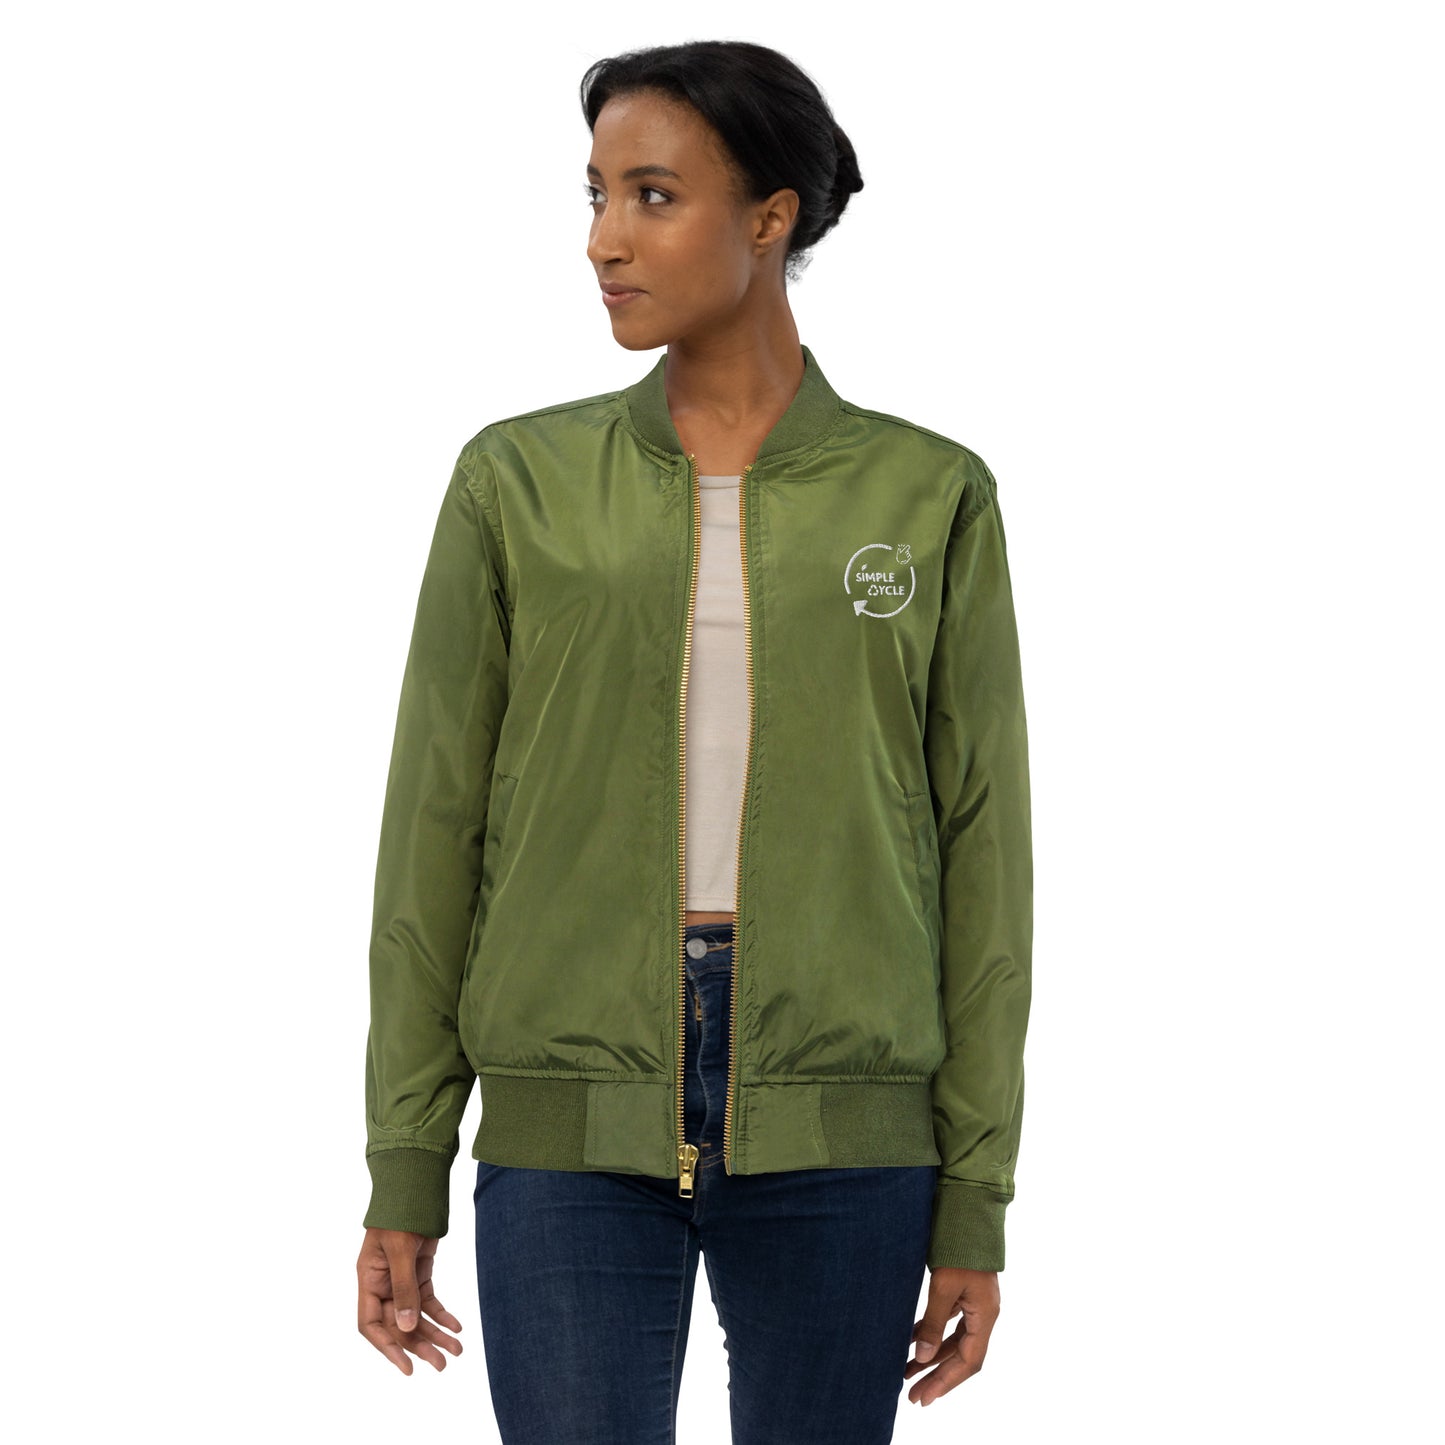 SimpleCycle Embroidered Premium Recycled Bomber Jacket green on a model